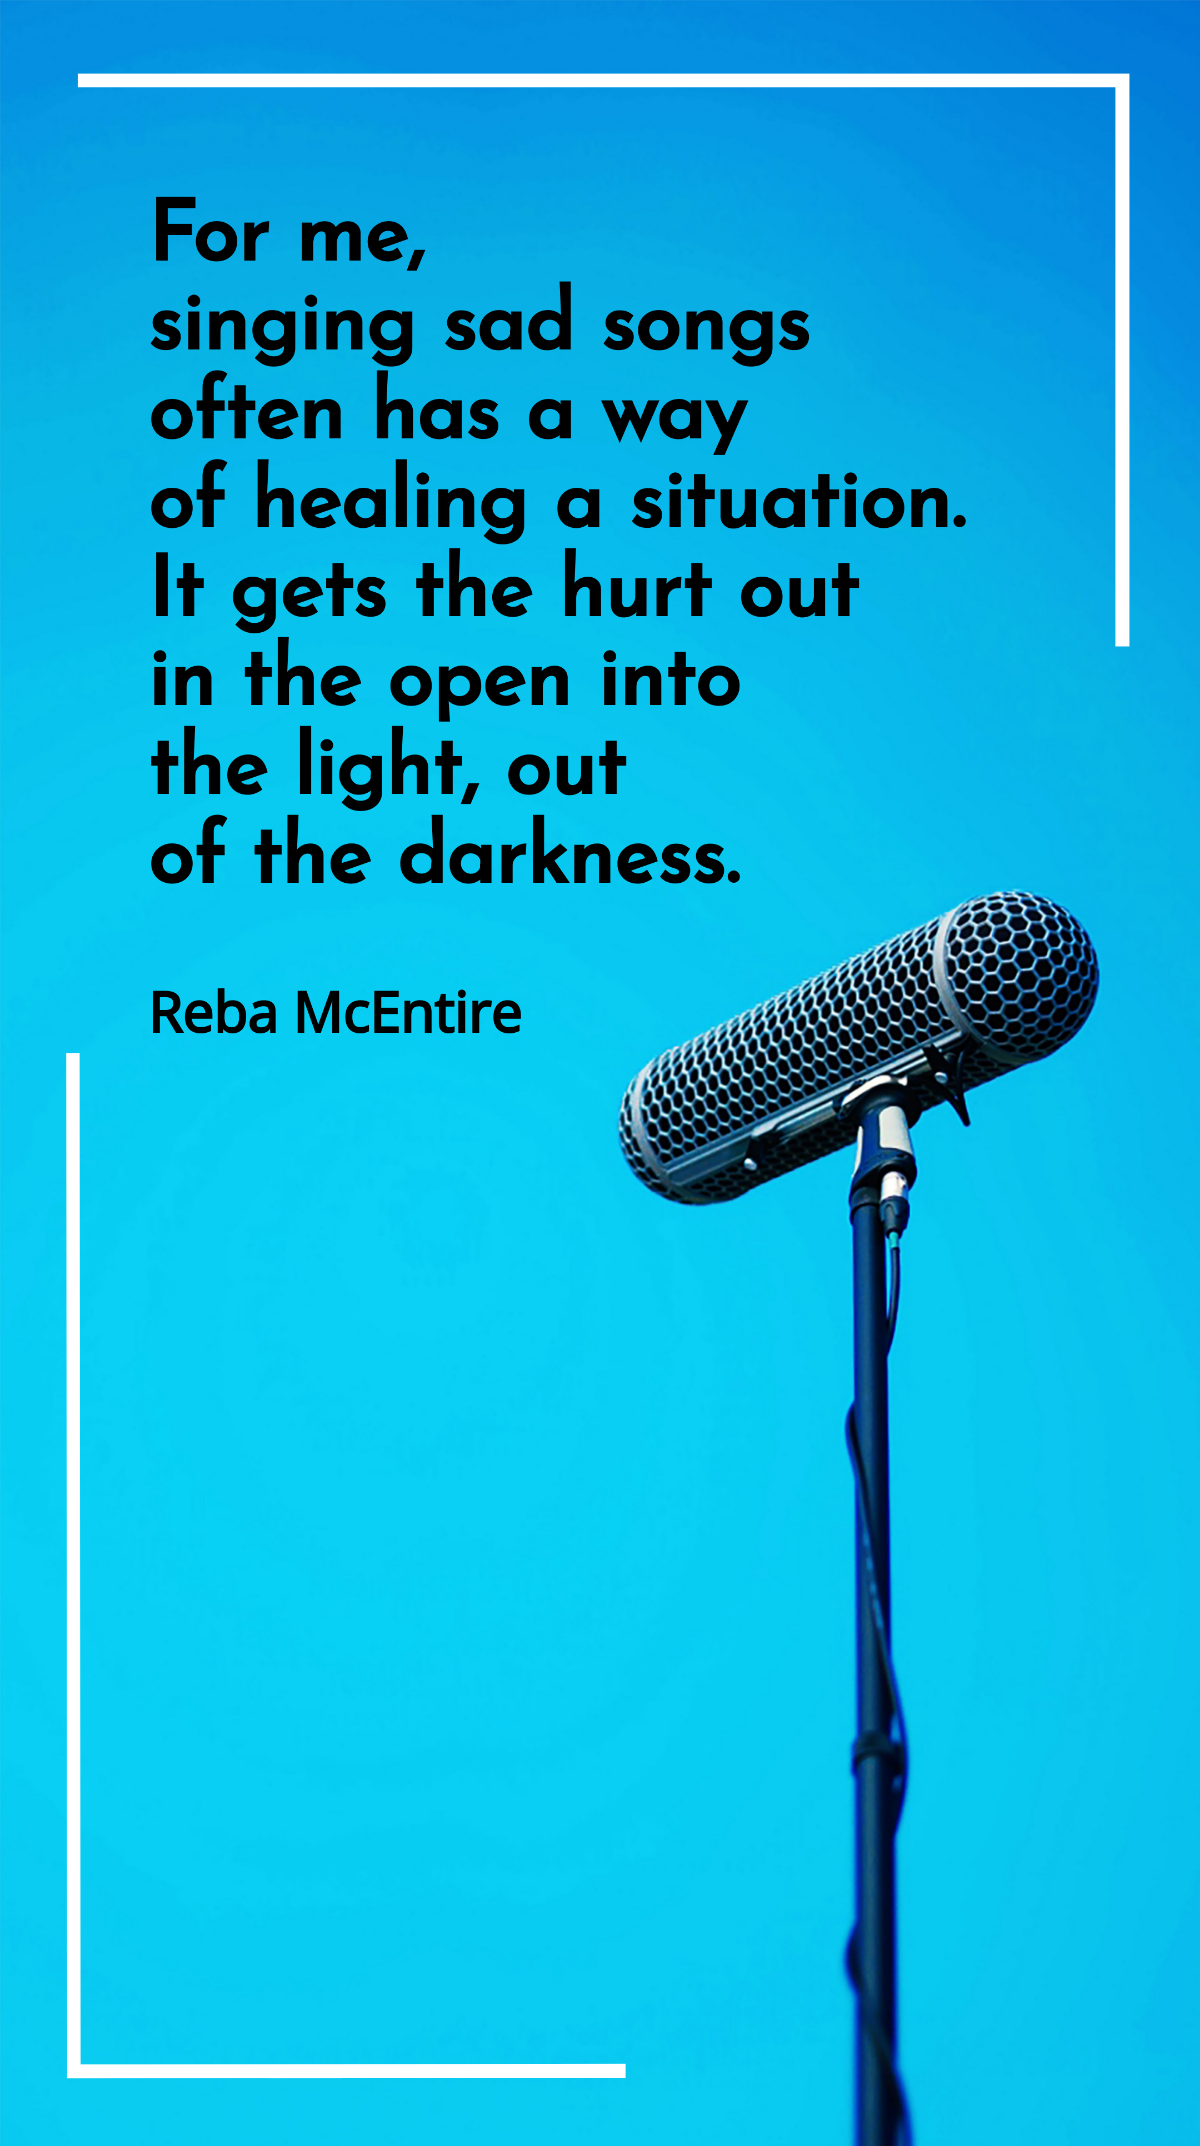 Reba McEntire - For me, singing sad songs often has a way of healing a situation. It gets the hurt out in the open into the light, out of the darkness. Template